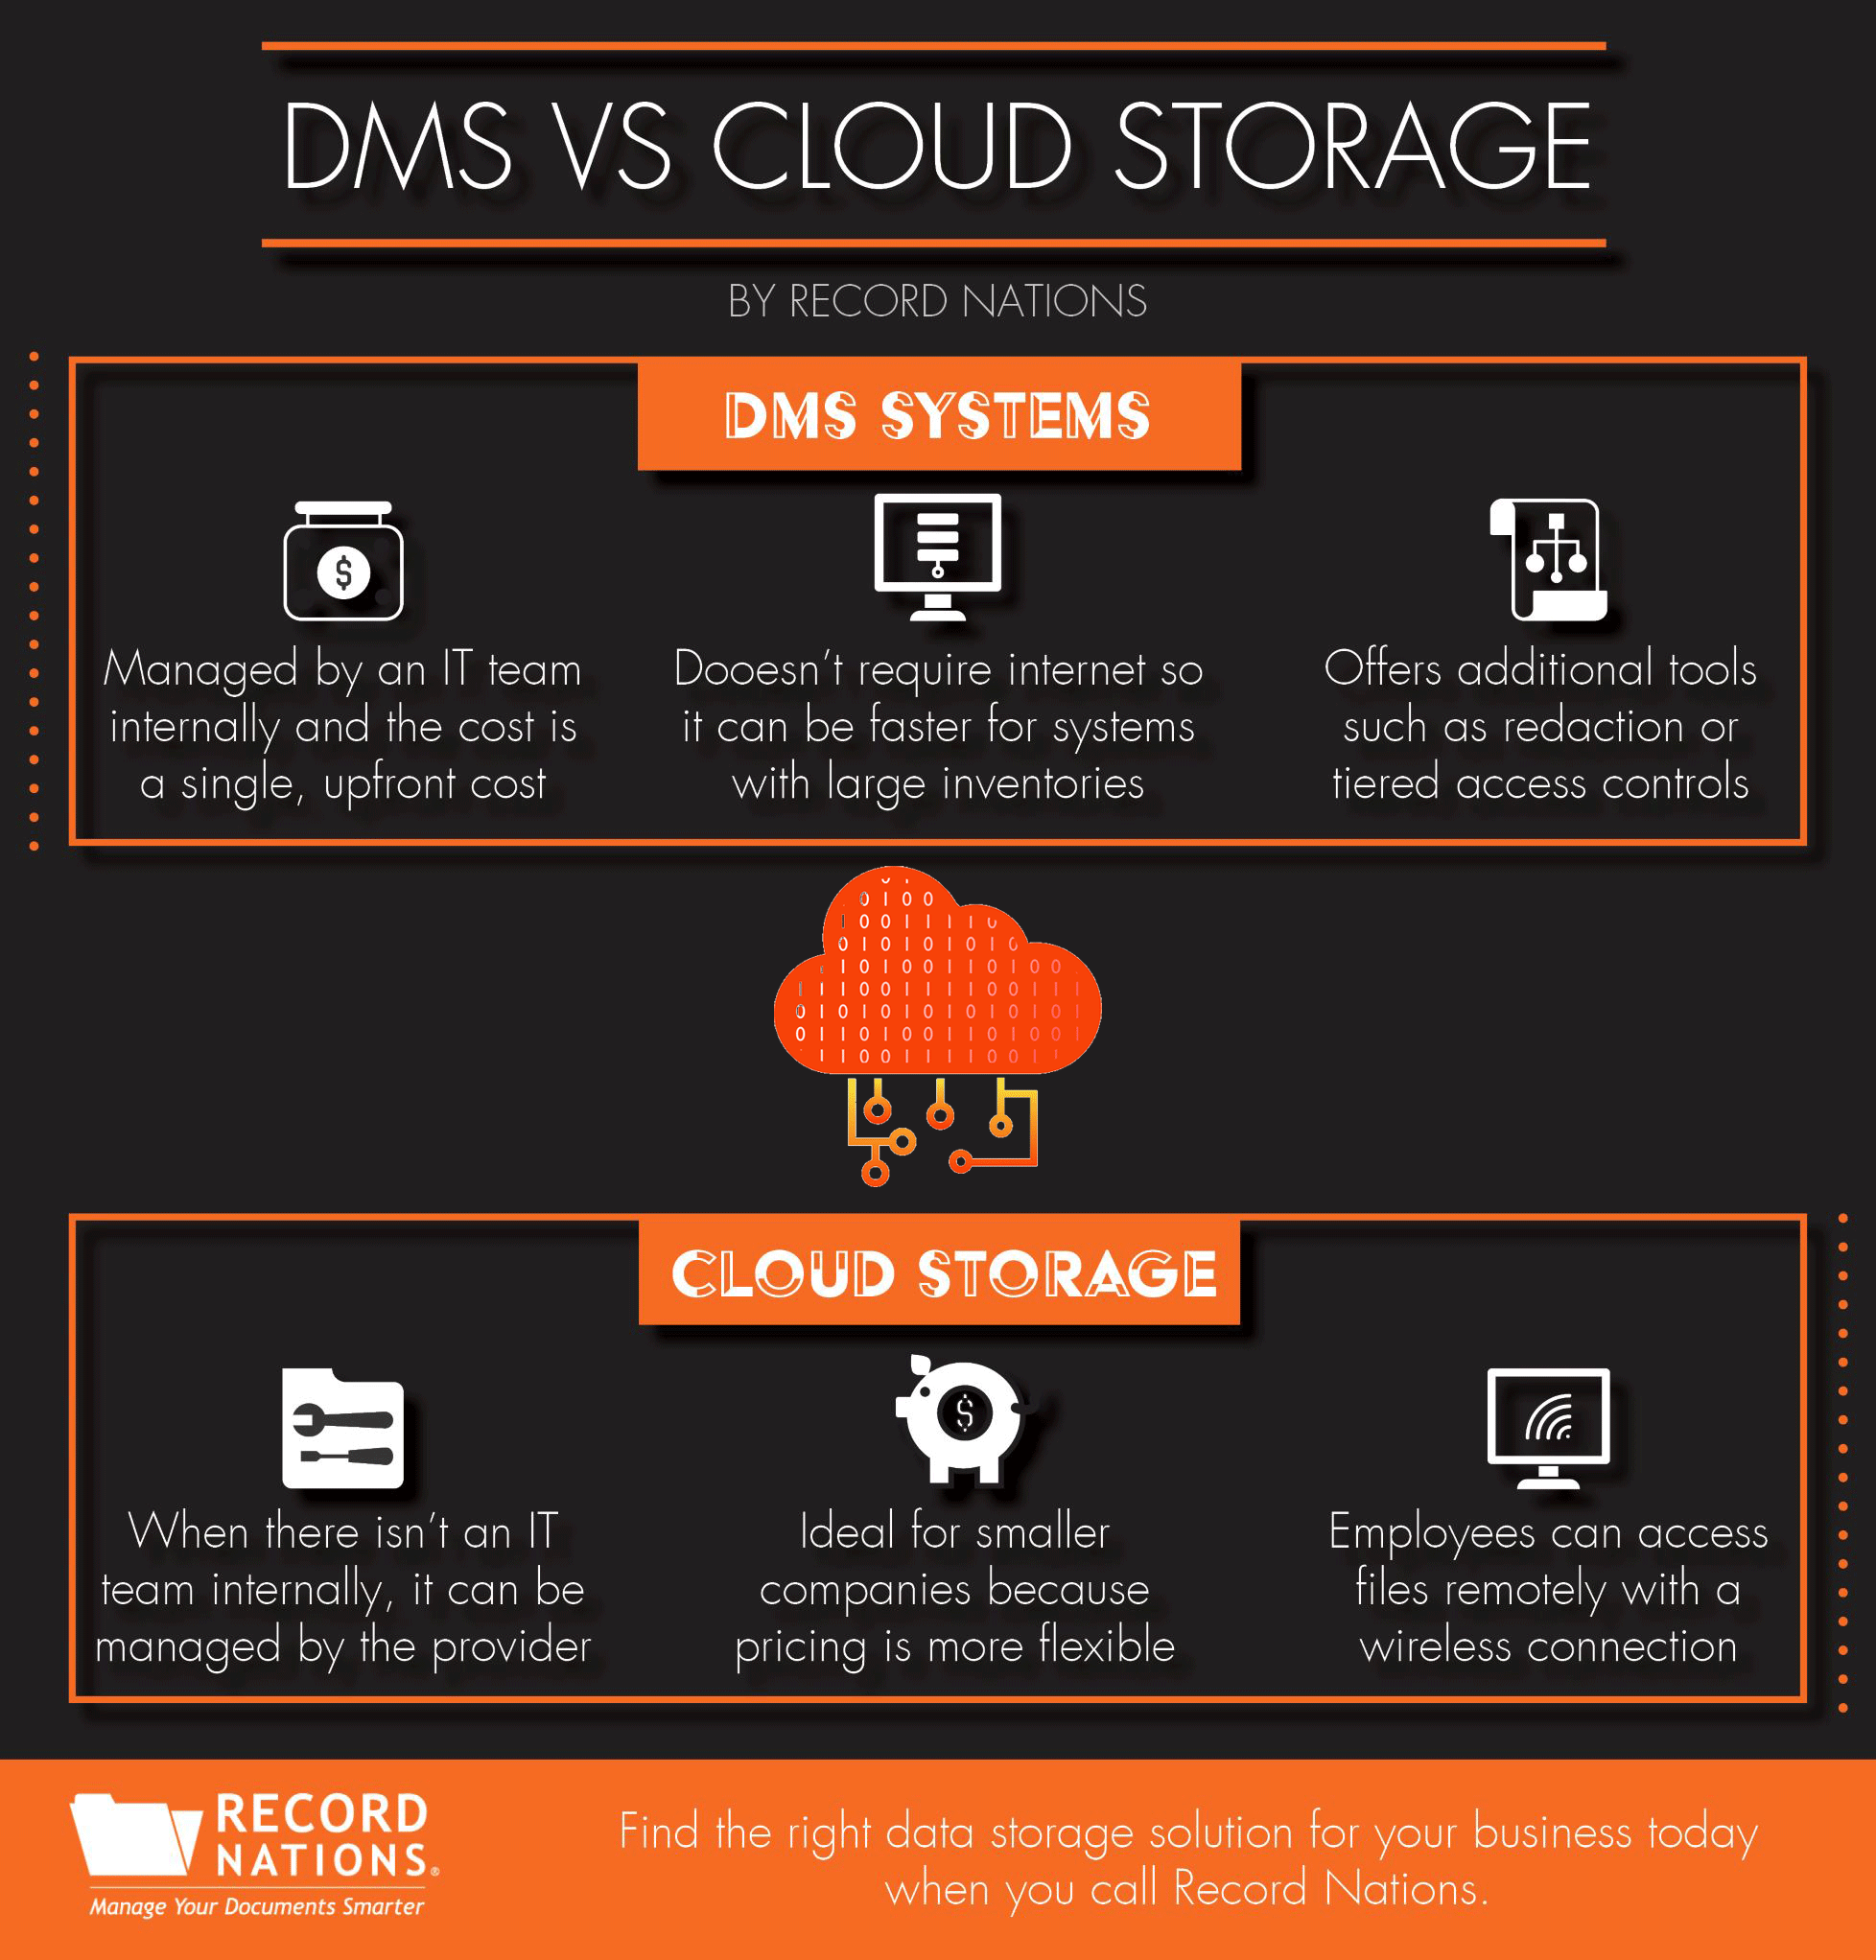 Comparing DMS Systems and Cloud Storage